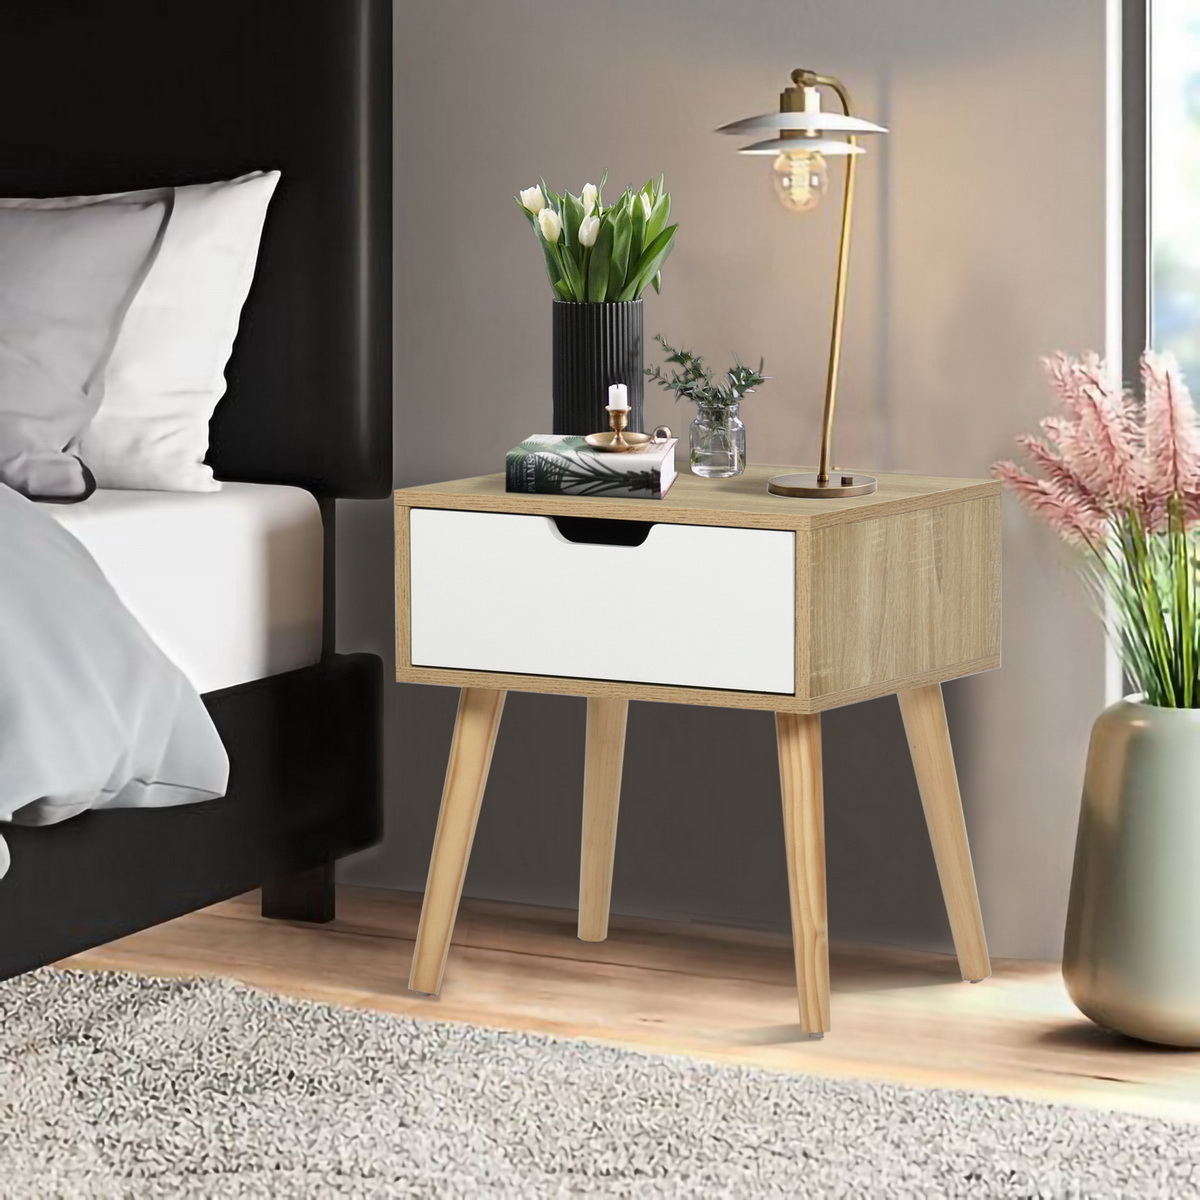 20.1Inch Tall End Table with Storage